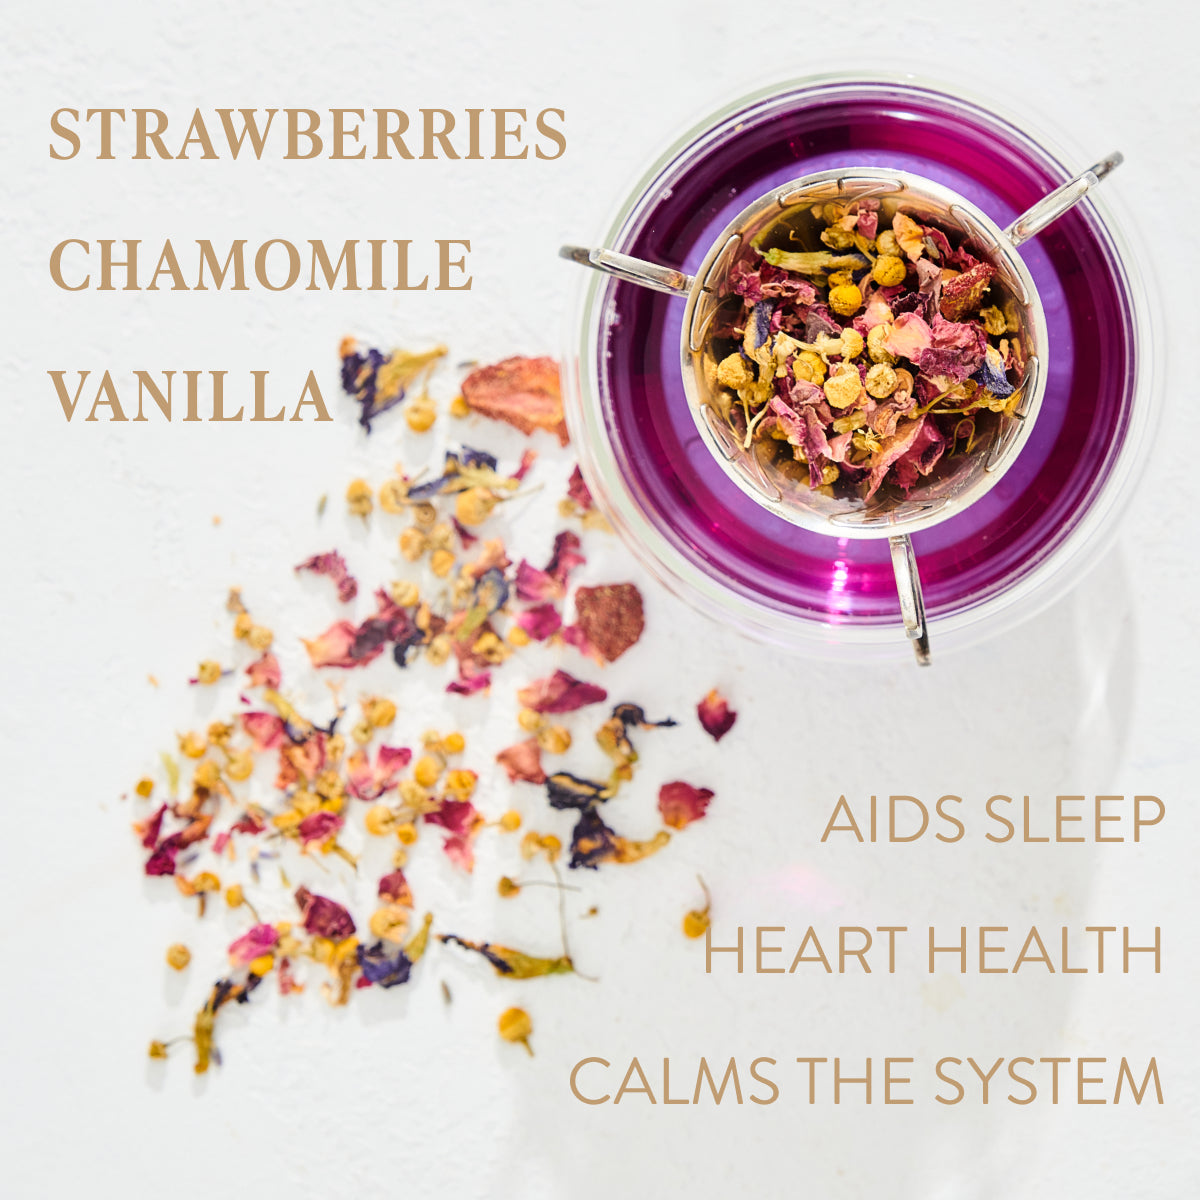 A glass cup of Magic Hour's Queen of Ukraine: Spring Blossom Tea sits on a white surface. The tea, a mix of dried strawberries, chamomile, and vanilla flowers, has some scattered around the cup. Text on the image lists ingredients and benefits: "Aids Sleep," "Heart Health," and "Calms the System." Experience the magic hour with every sip.